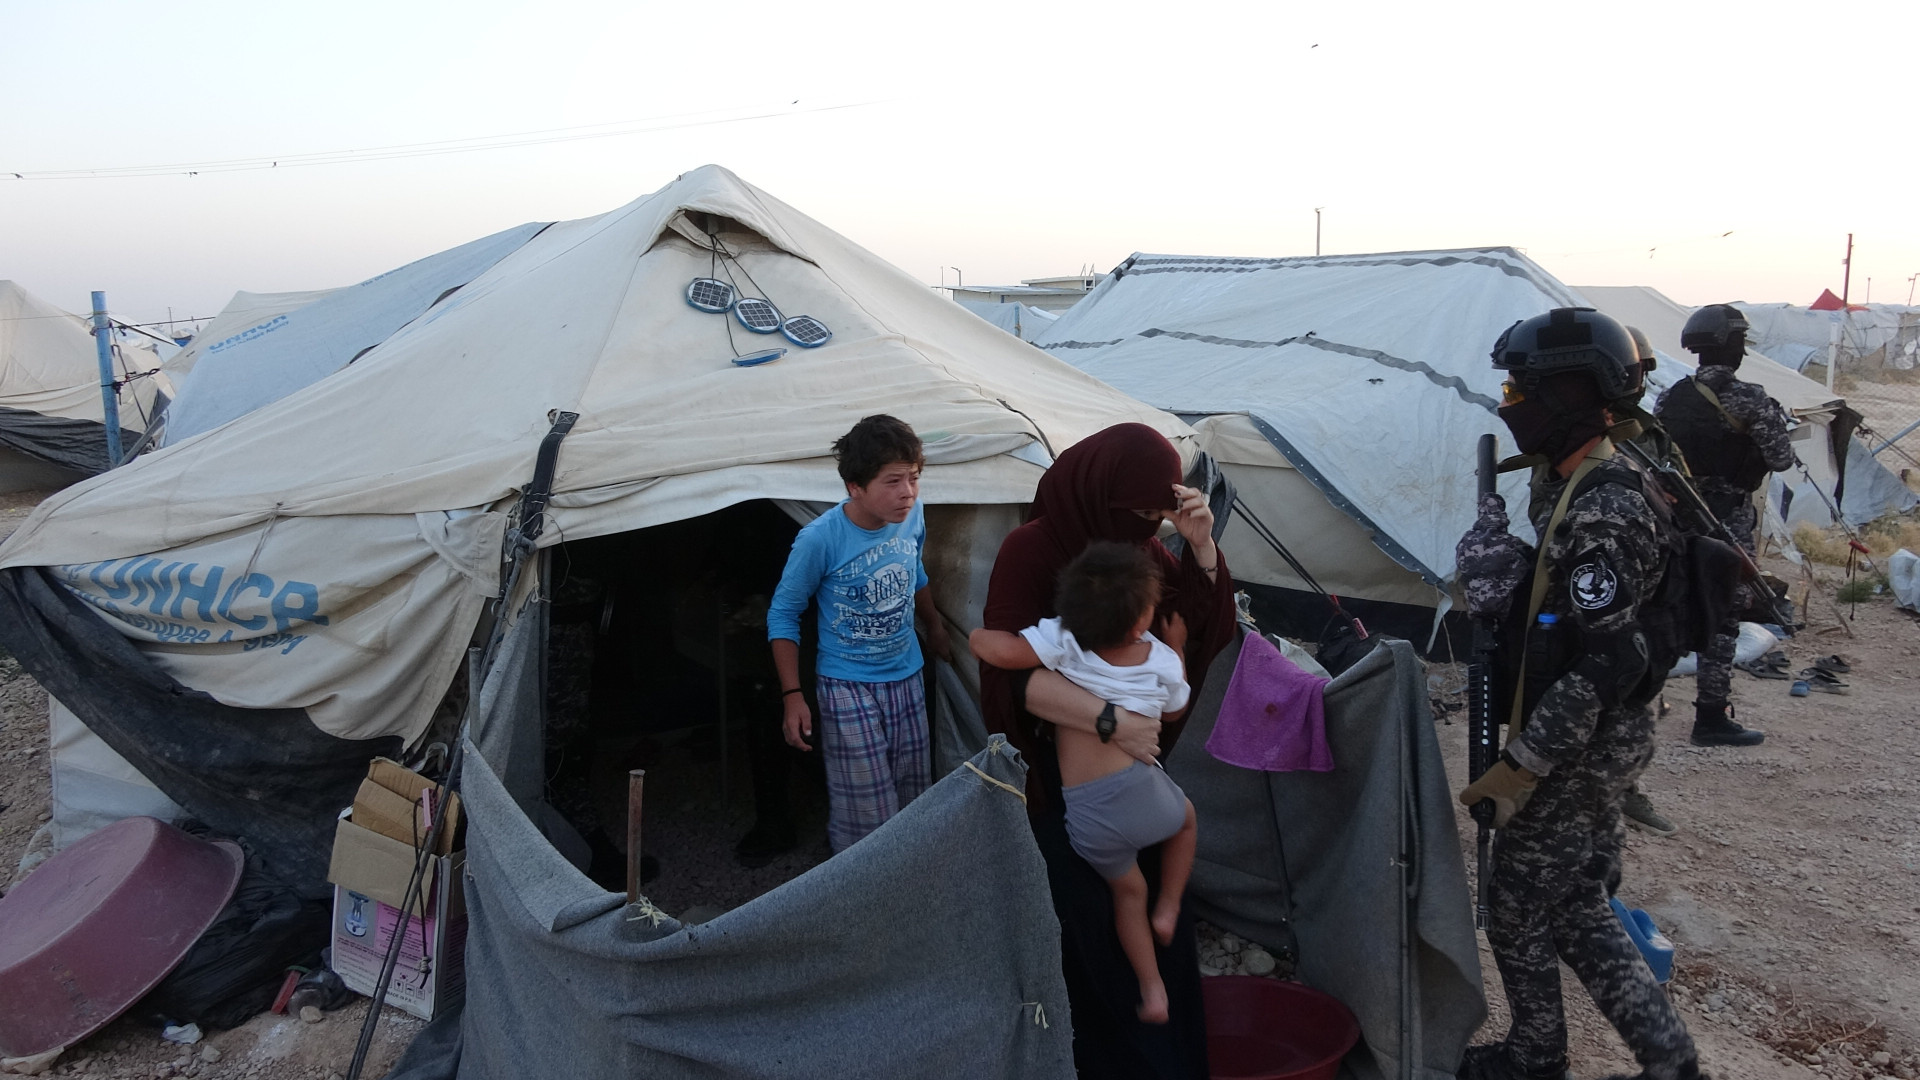 Twelve Iraqi and Syrian refugees died in Al-Hol camp in only two weeks